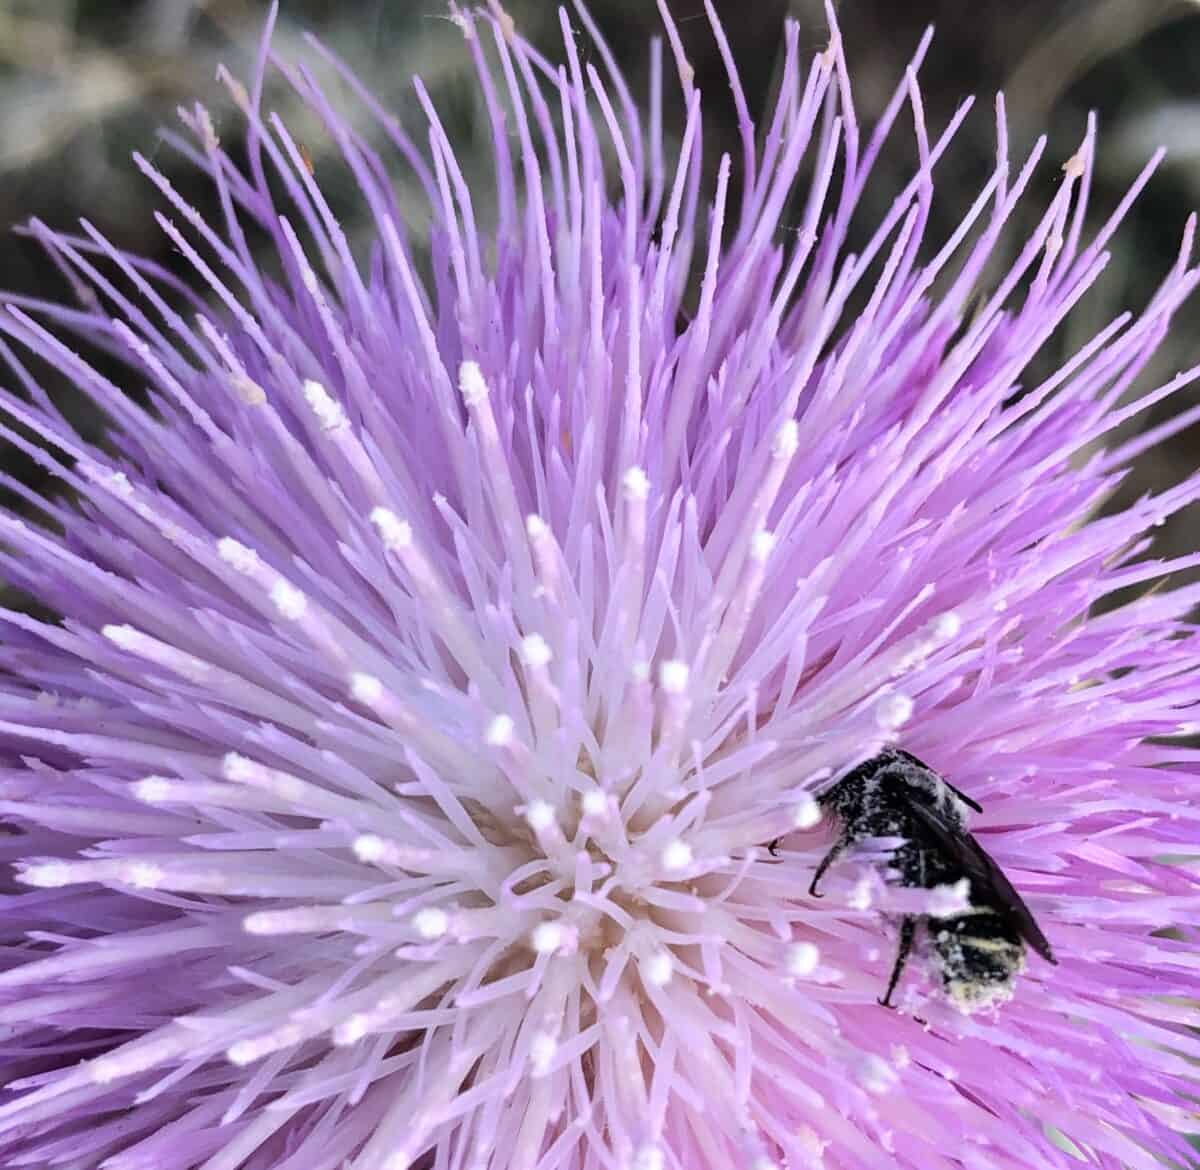 Thistles are particularly valued by bumblebees for their high nectar production. A bee is lying in the flower in a comatose-like trance.